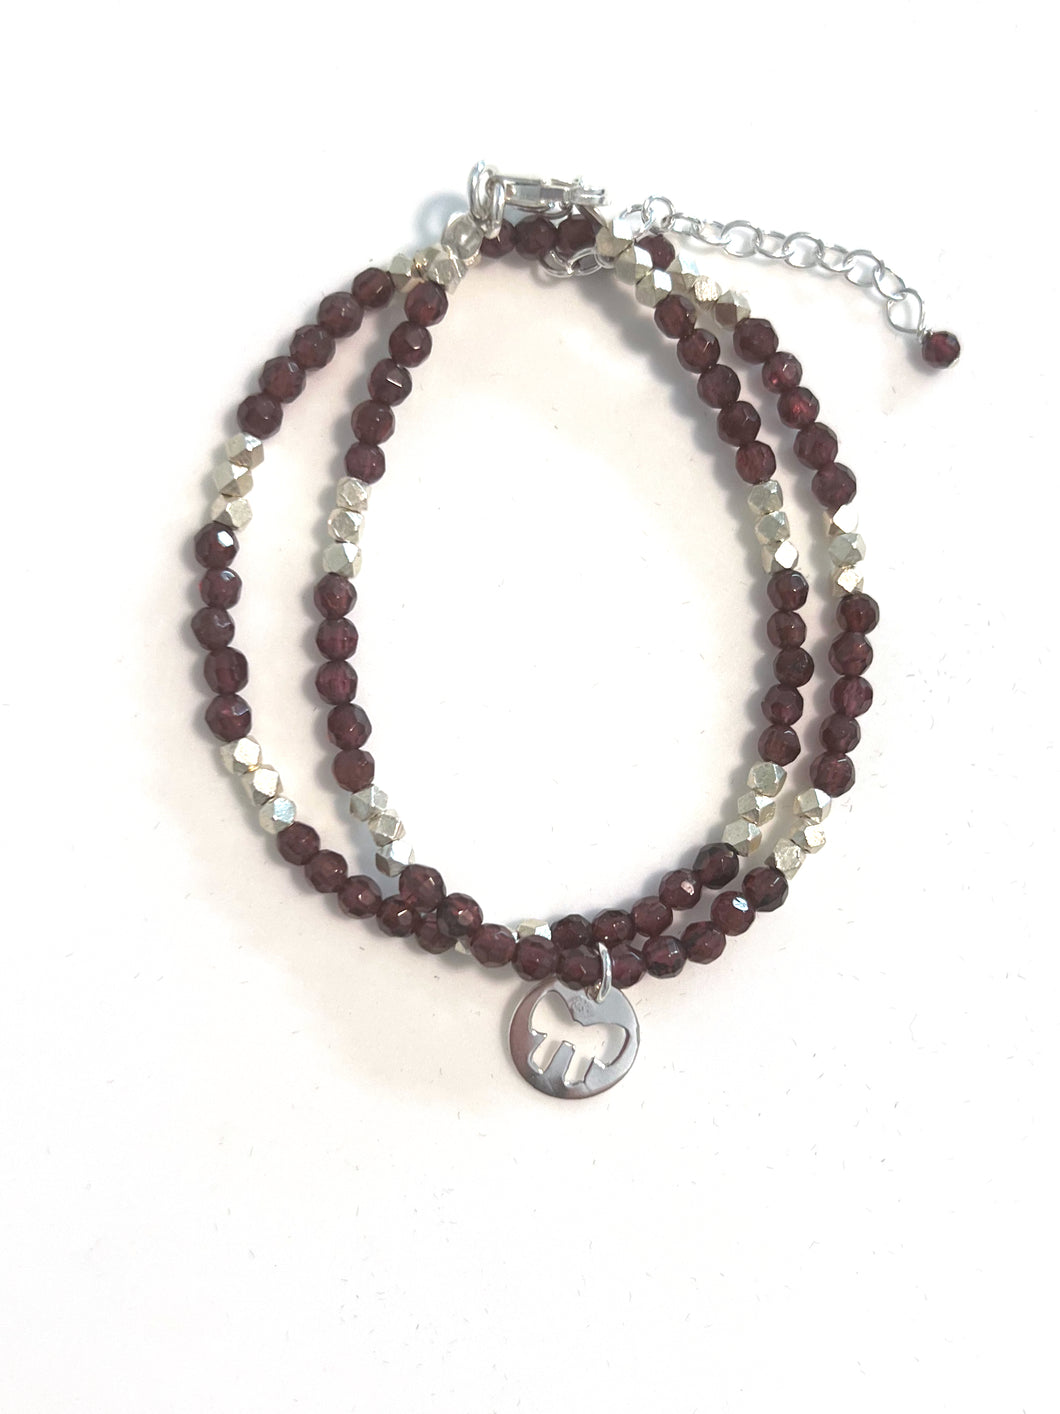 Red Double Wrap Facetted Garnet Bracelet with Sterling Silver Beads and Bow Charm